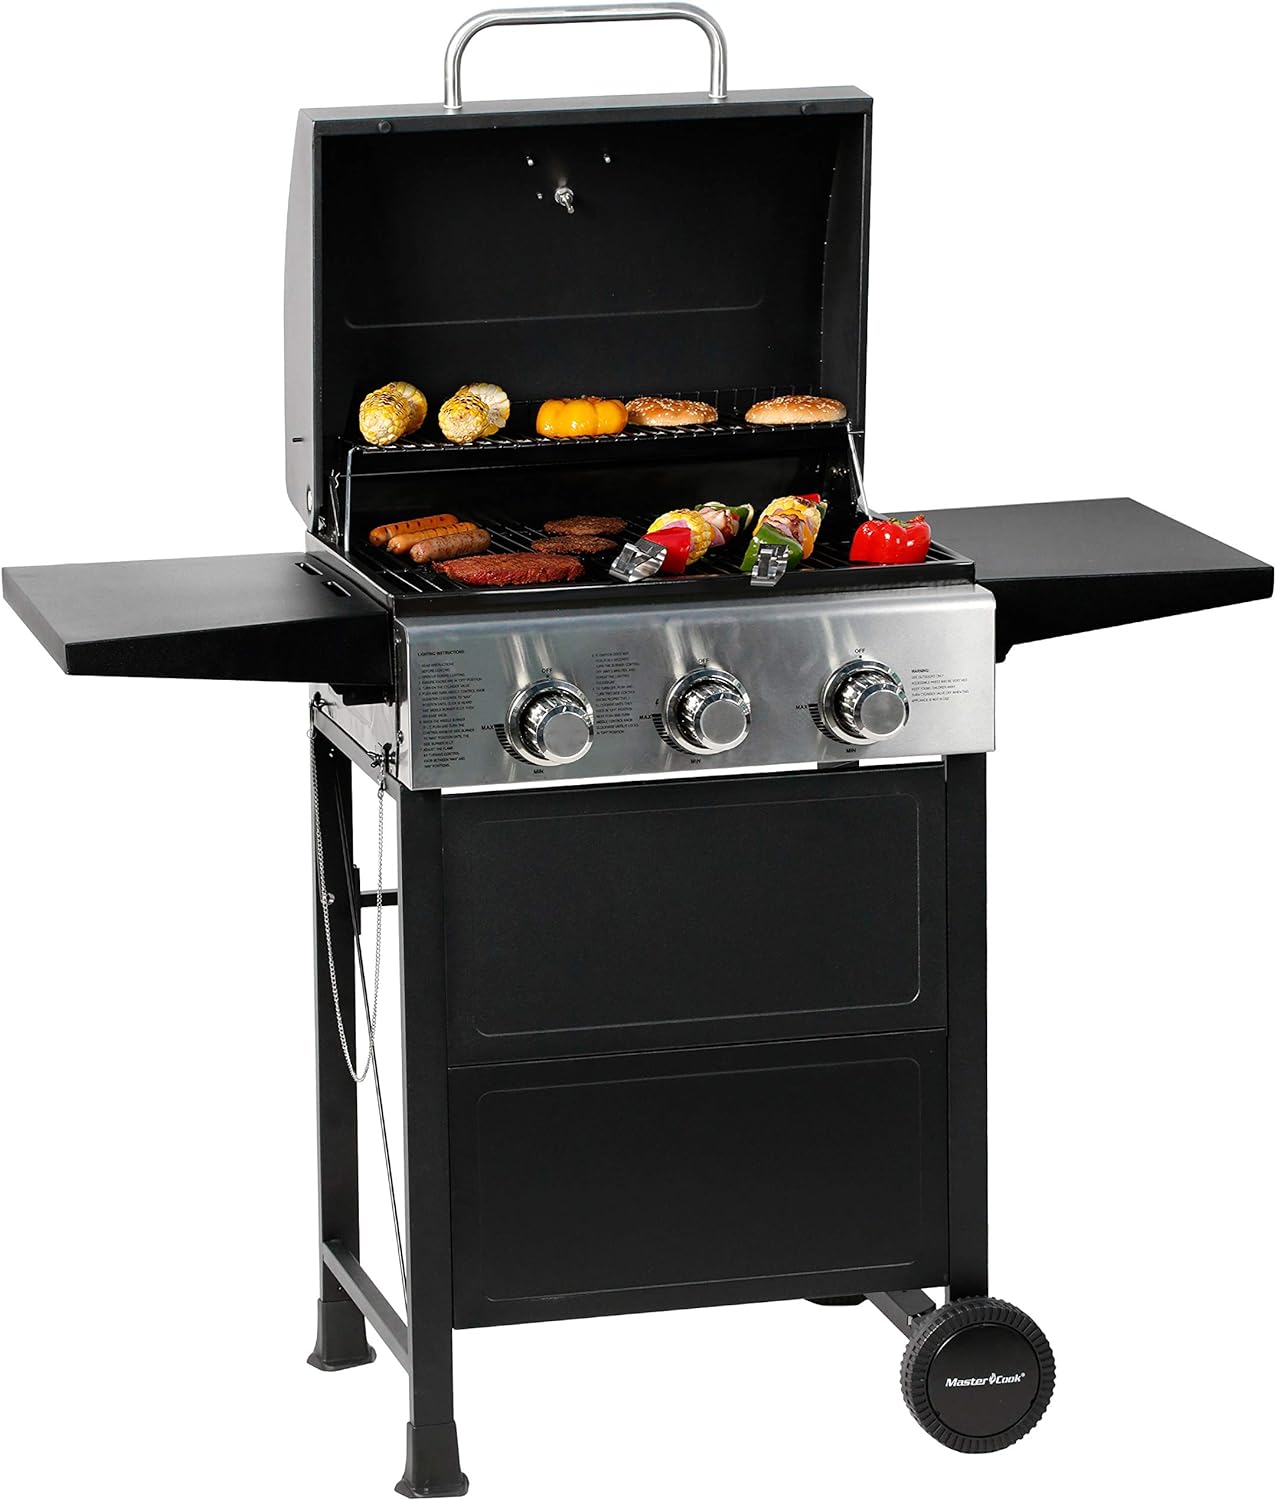 MASTER COOK 3 Burner BBQ Propane Gas Grill, Stainless Steel 30,000 BTU Patio Garden Barbecue Grill with Two Foldable Shelves